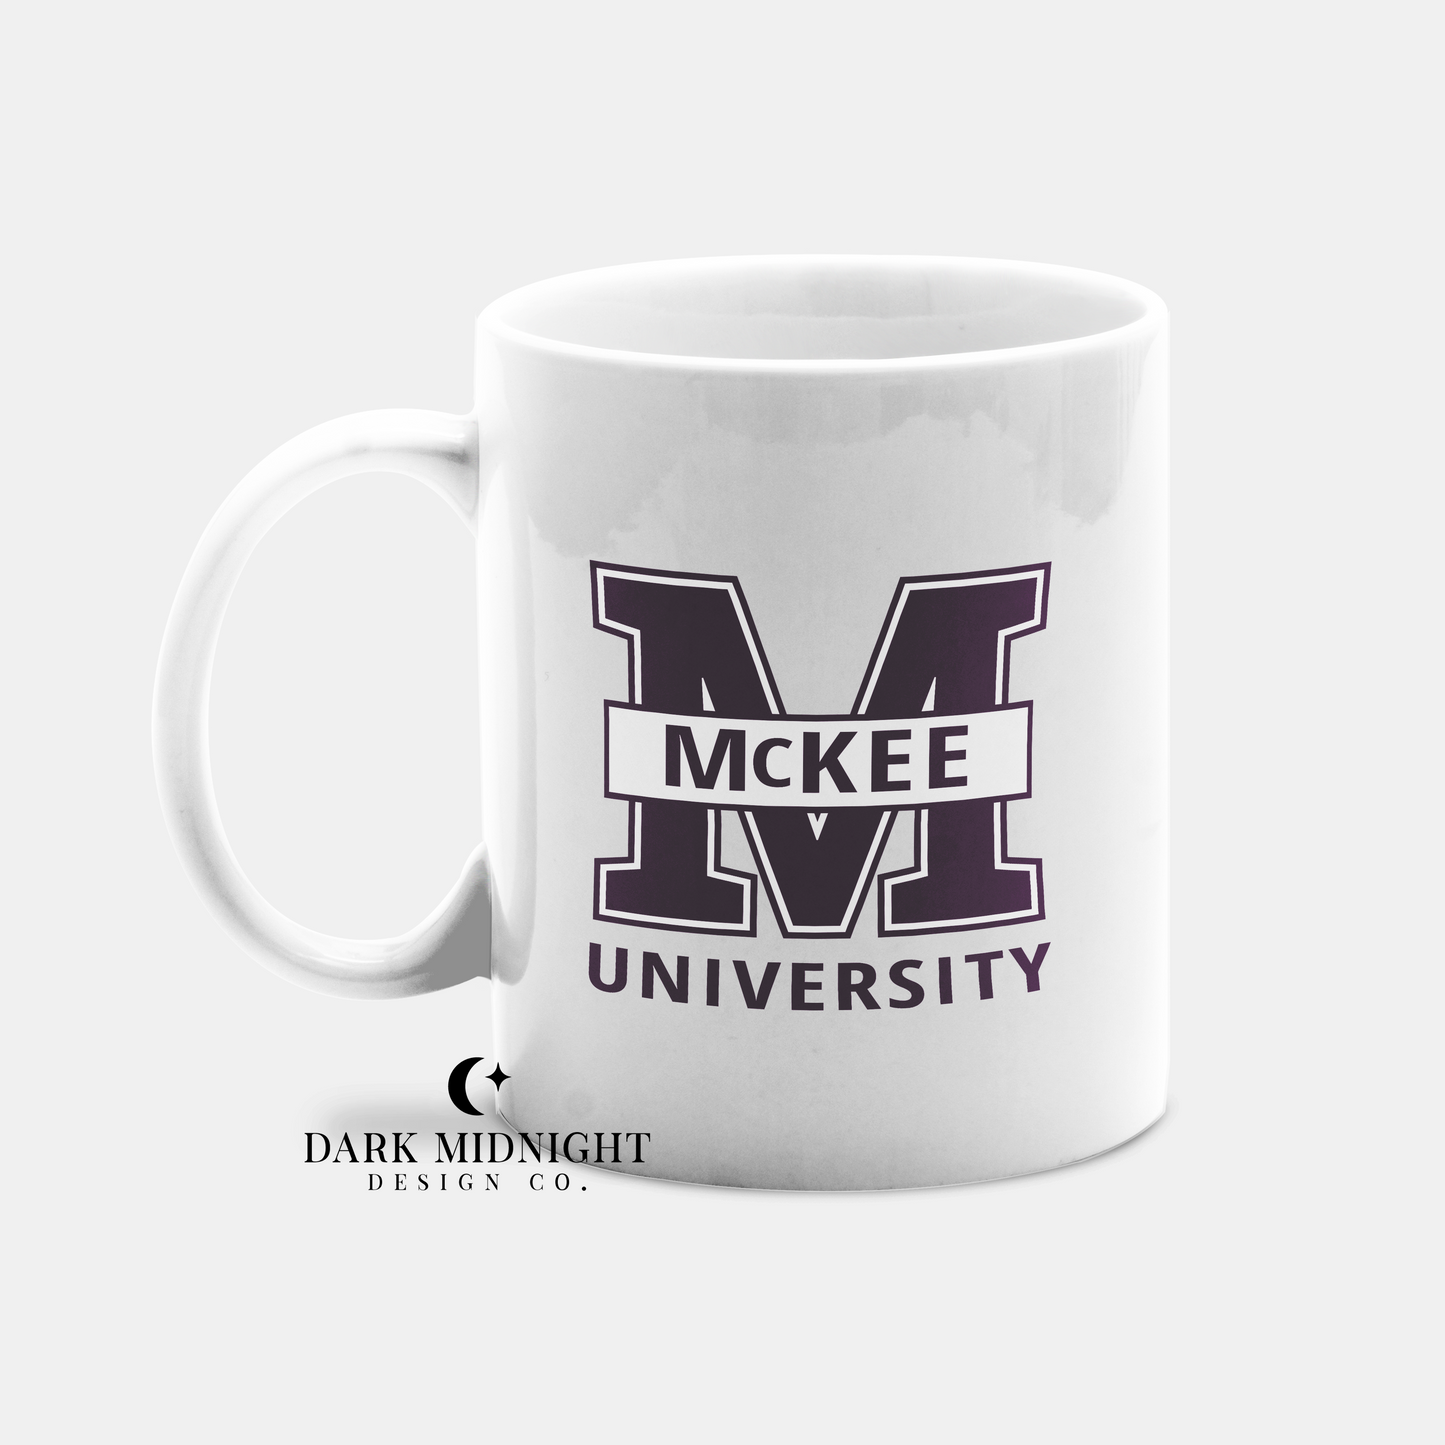 McKee University 15oz Mug - Officially Licensed Beyond The Play Series